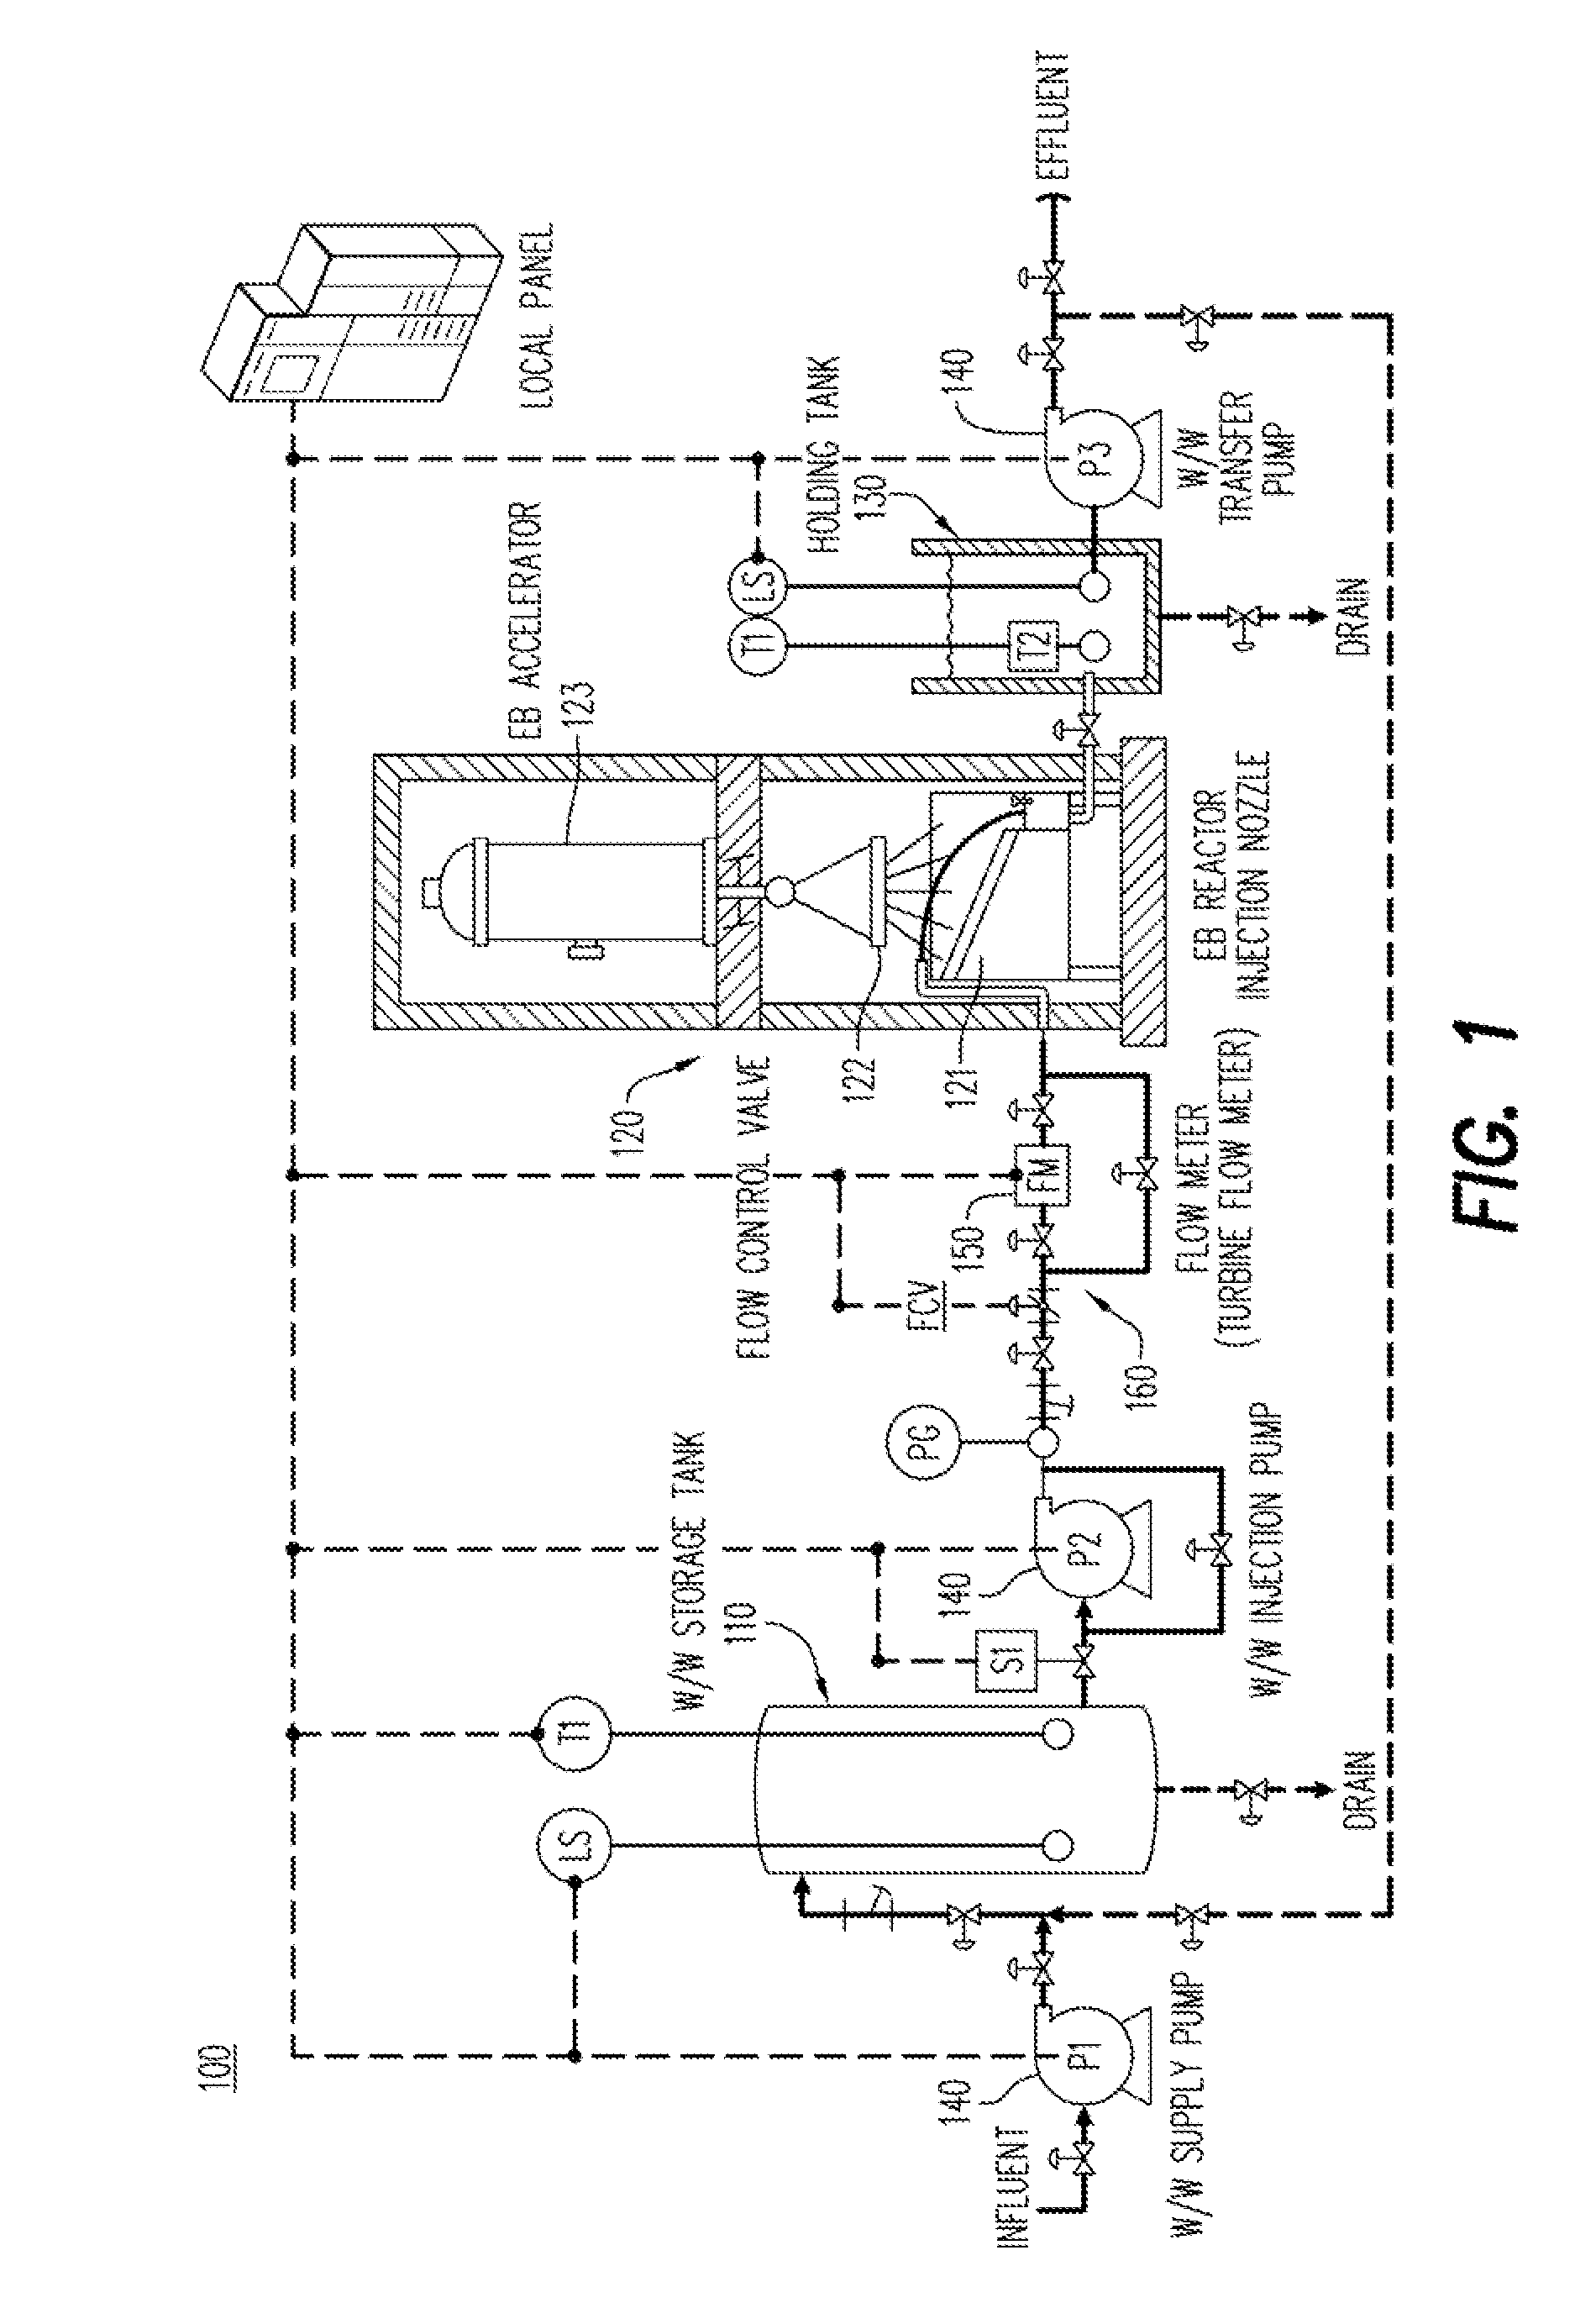 Apparatus and method for treating ship ballast water using electron beams